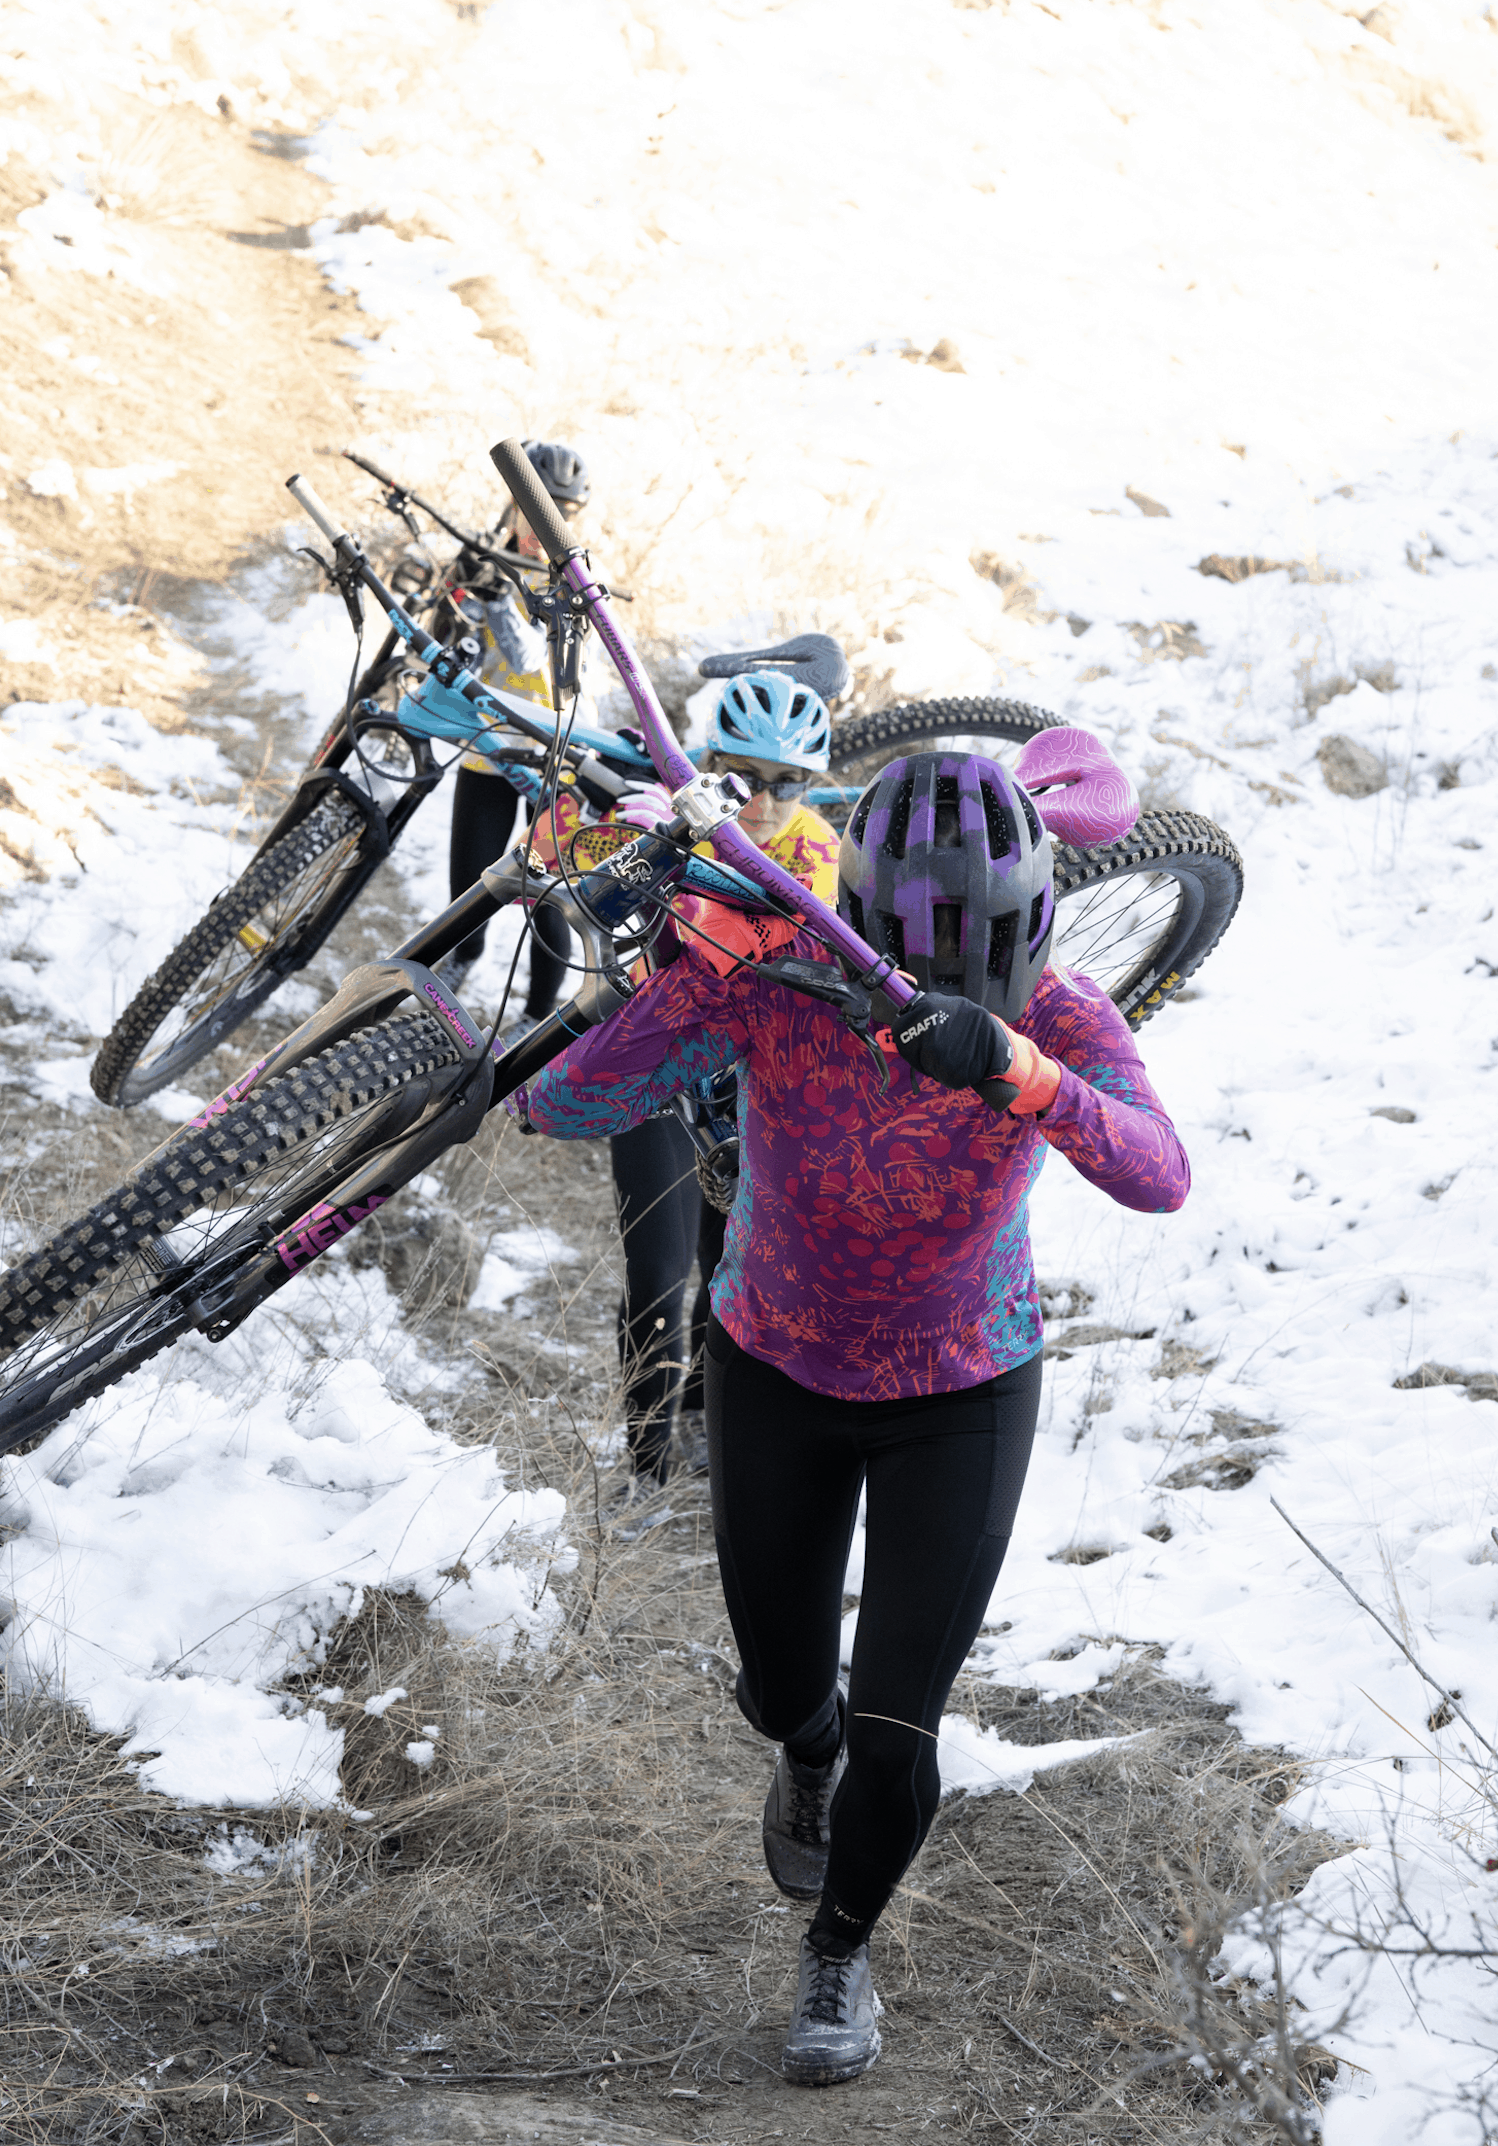 Women shouldering their mountain bikes to climb a hill, snow on ground, wearing Terry bike jerseys and cycling tights